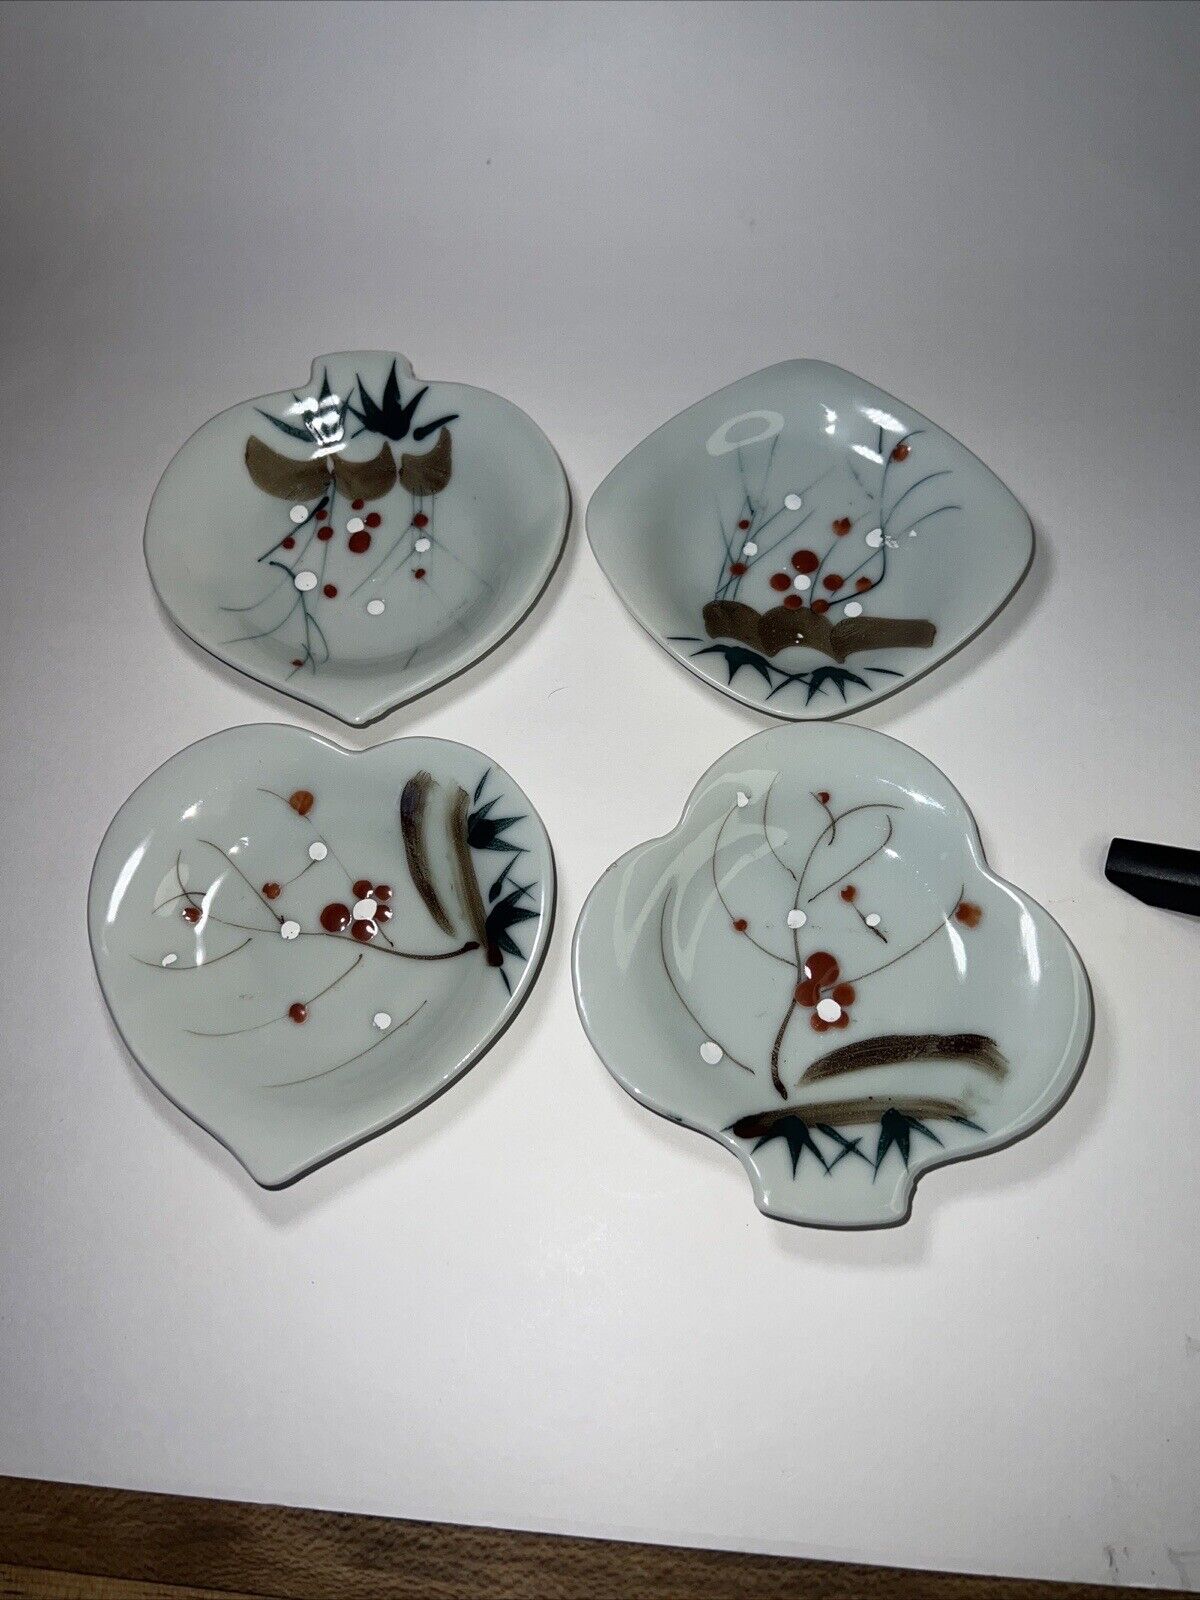 Vintage Japan Hand Painted Ceramic Card Suit Dishes Heart Spade Diamond Club